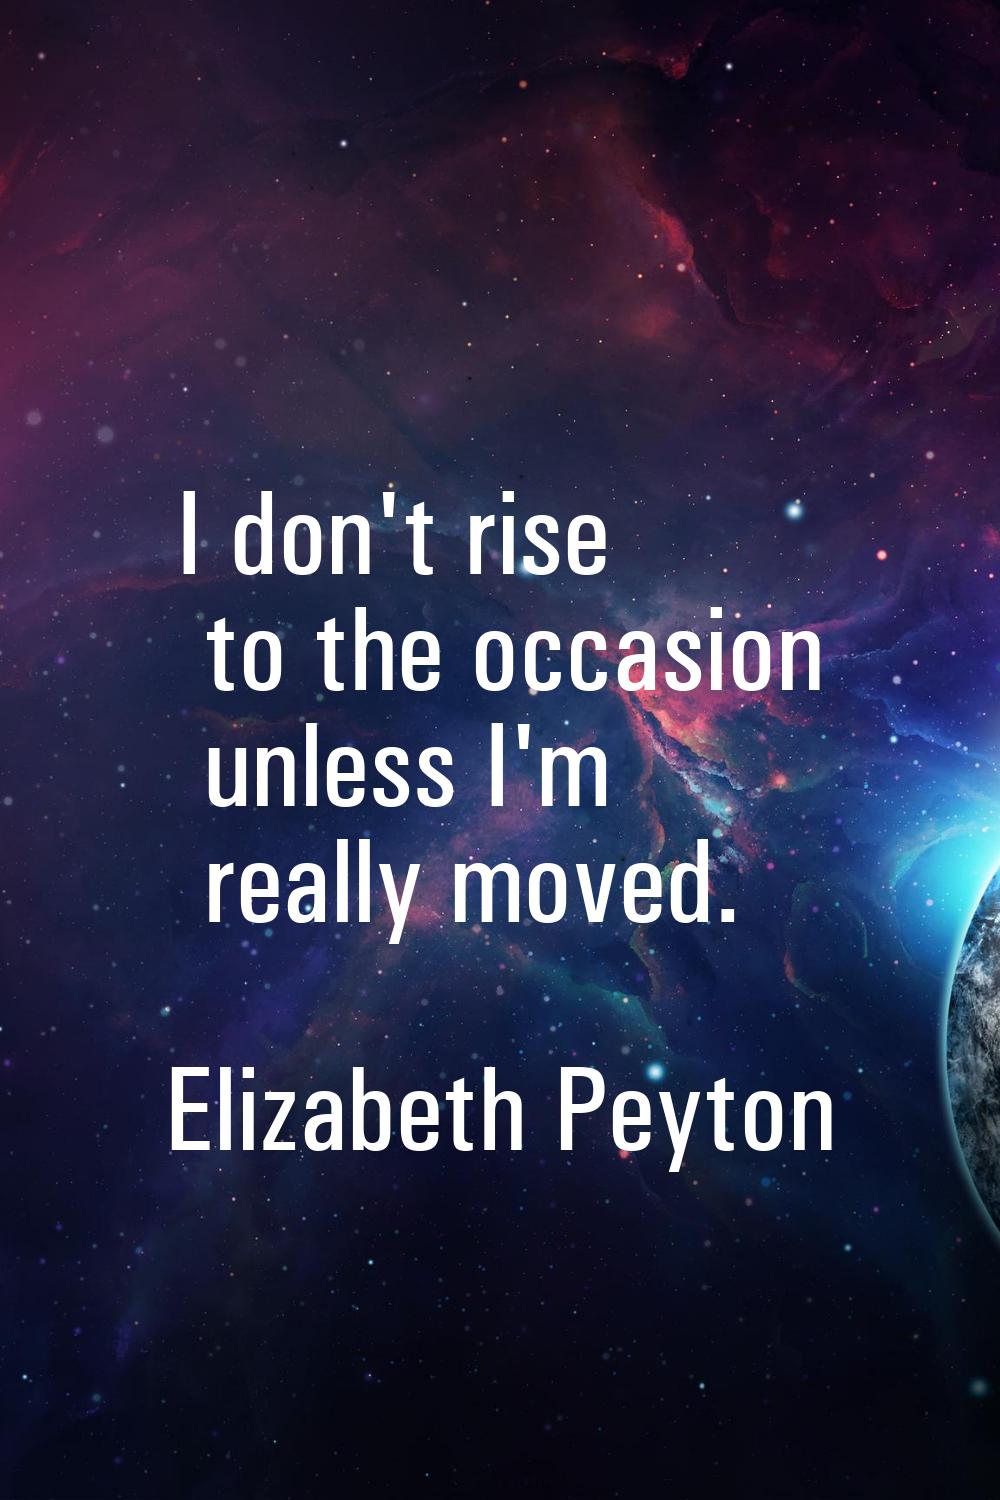 I don't rise to the occasion unless I'm really moved.